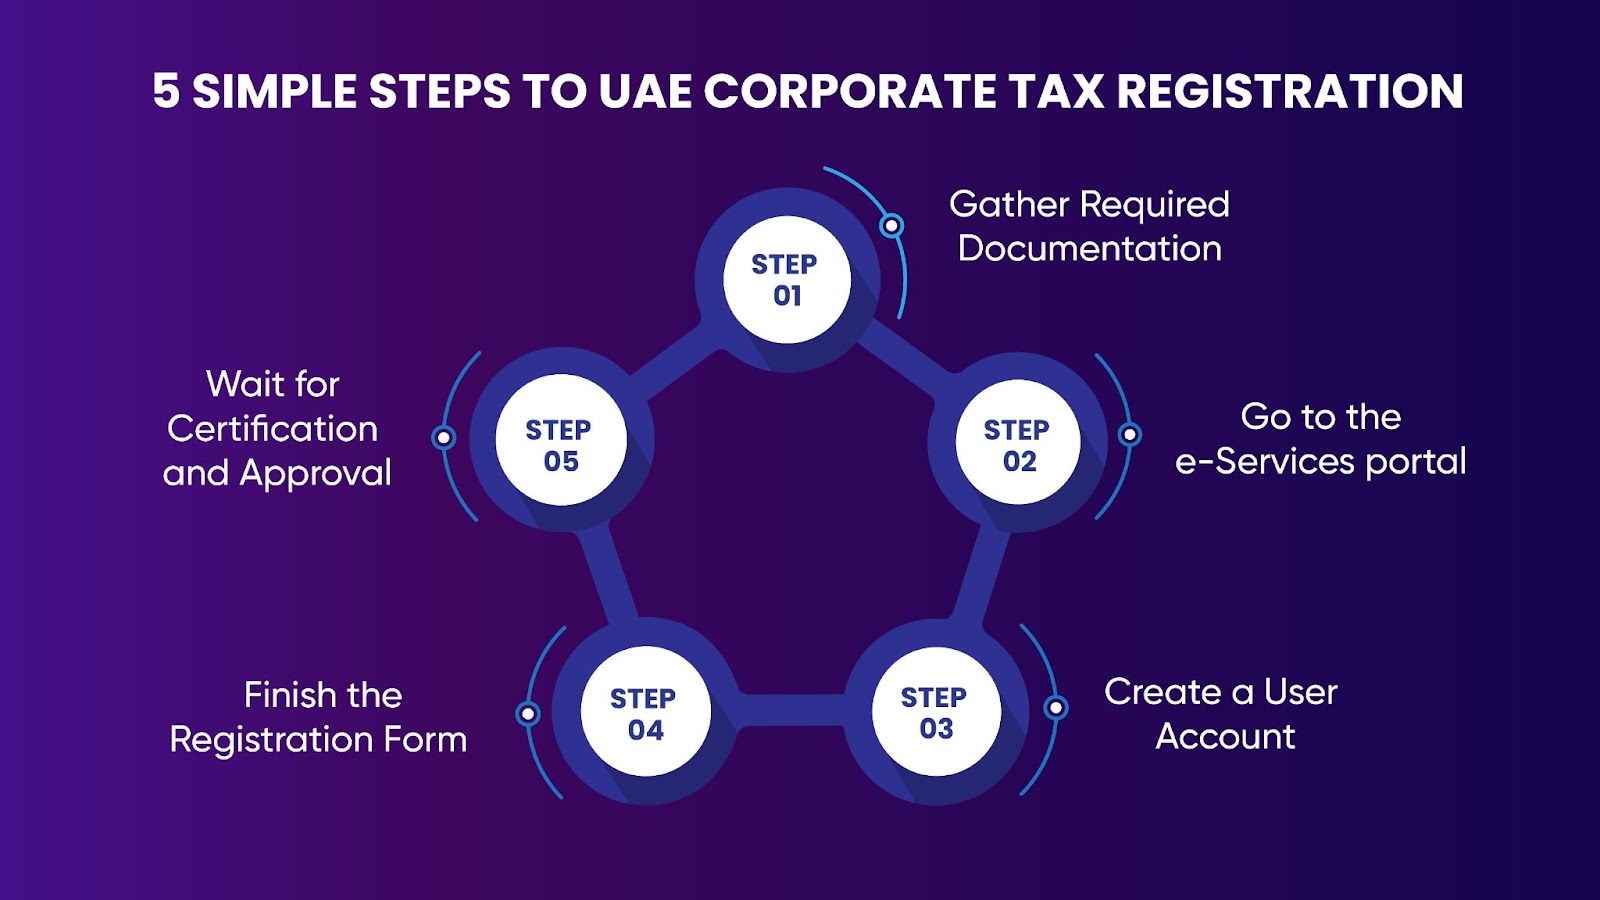 Steps to UAE Corporate Tax Registration